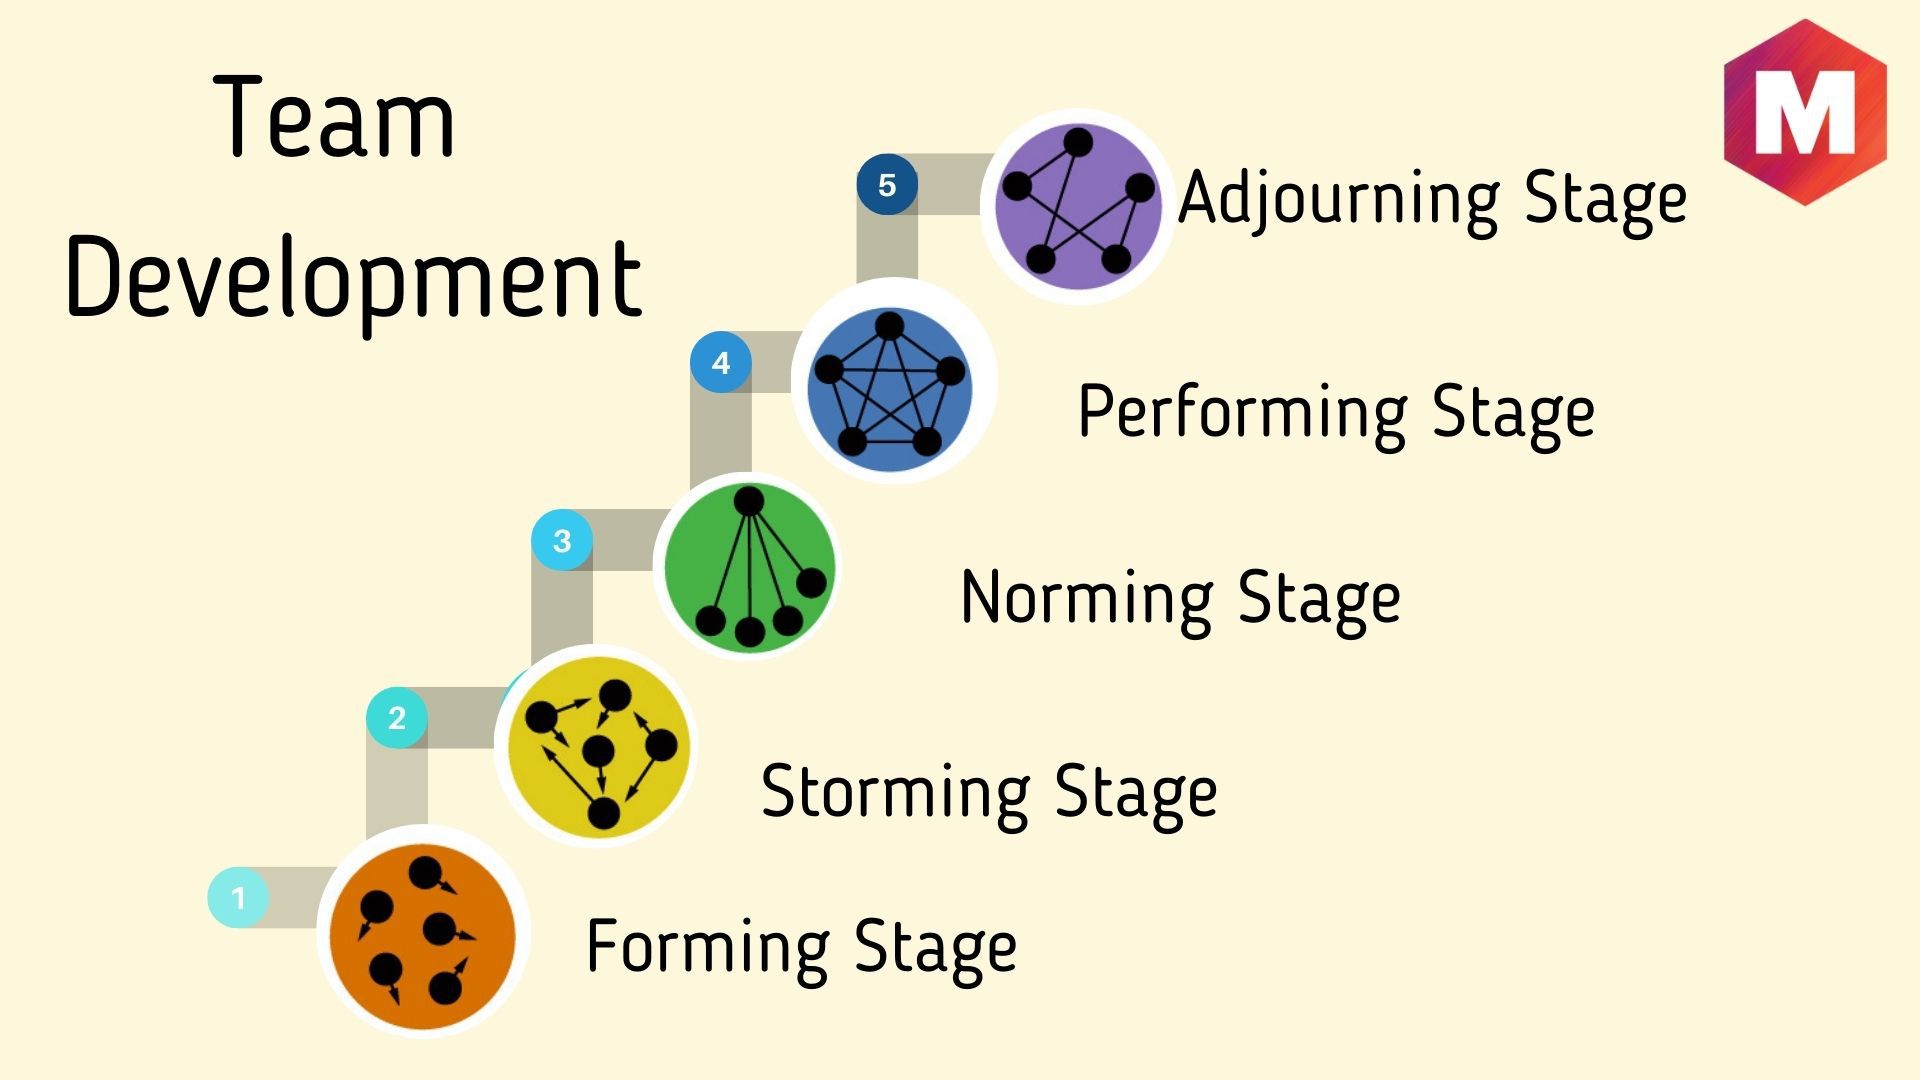 different stages of group development